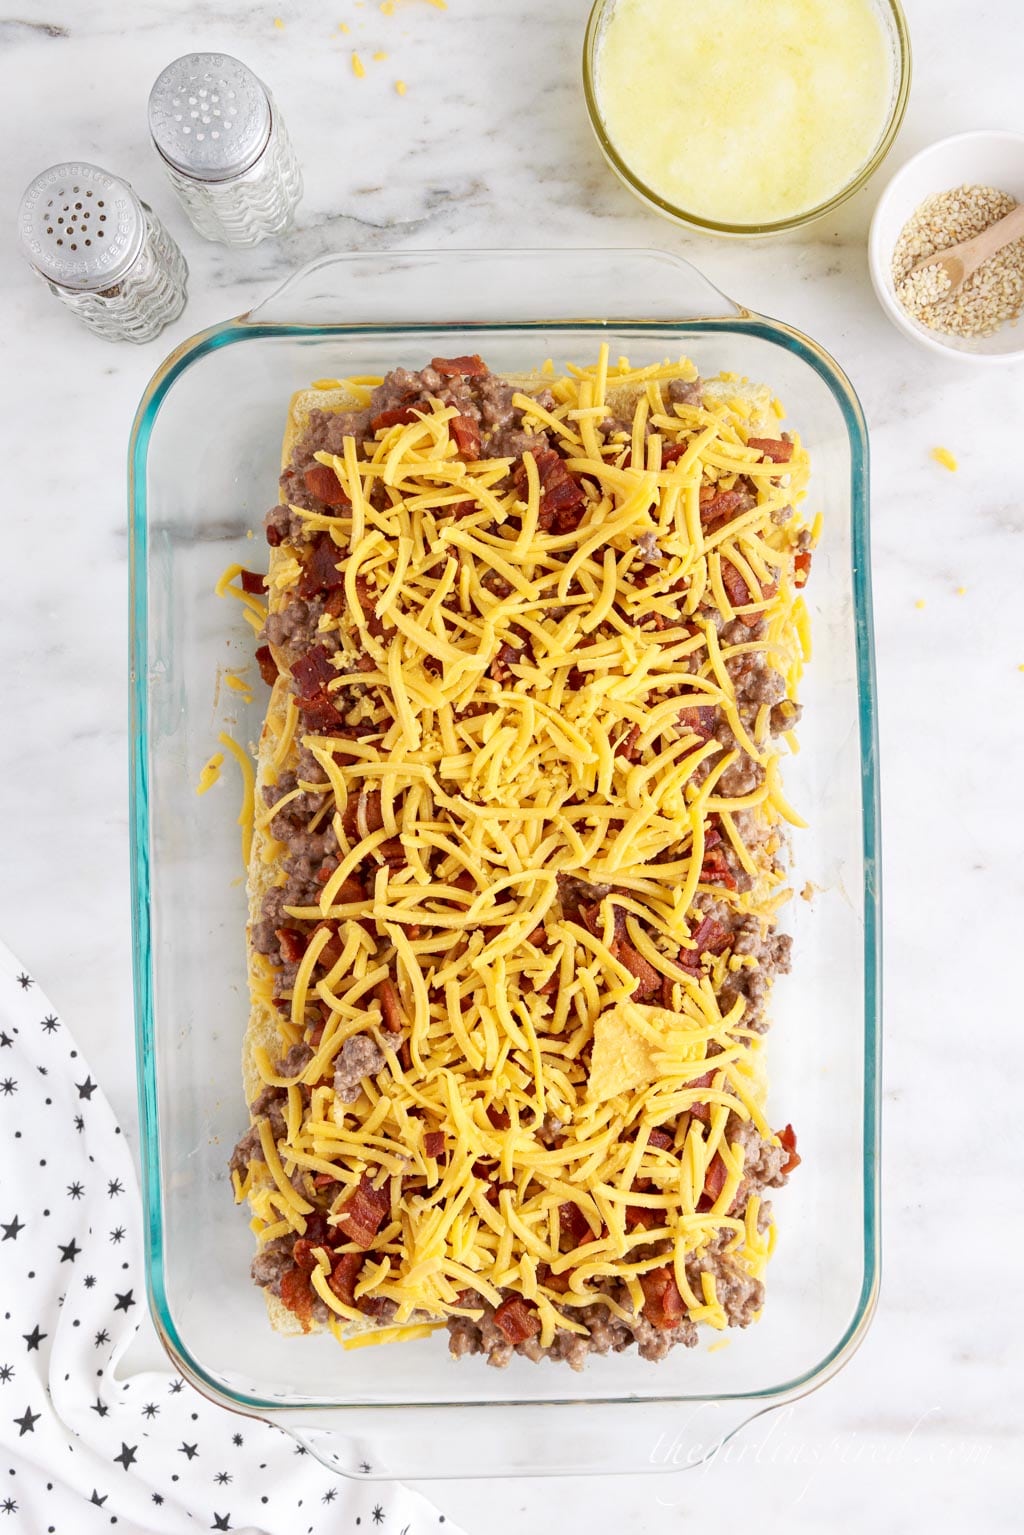 Halved rolls in baking tray topped with ground beef mixture and grated cheese, star linen, on a marble countertop